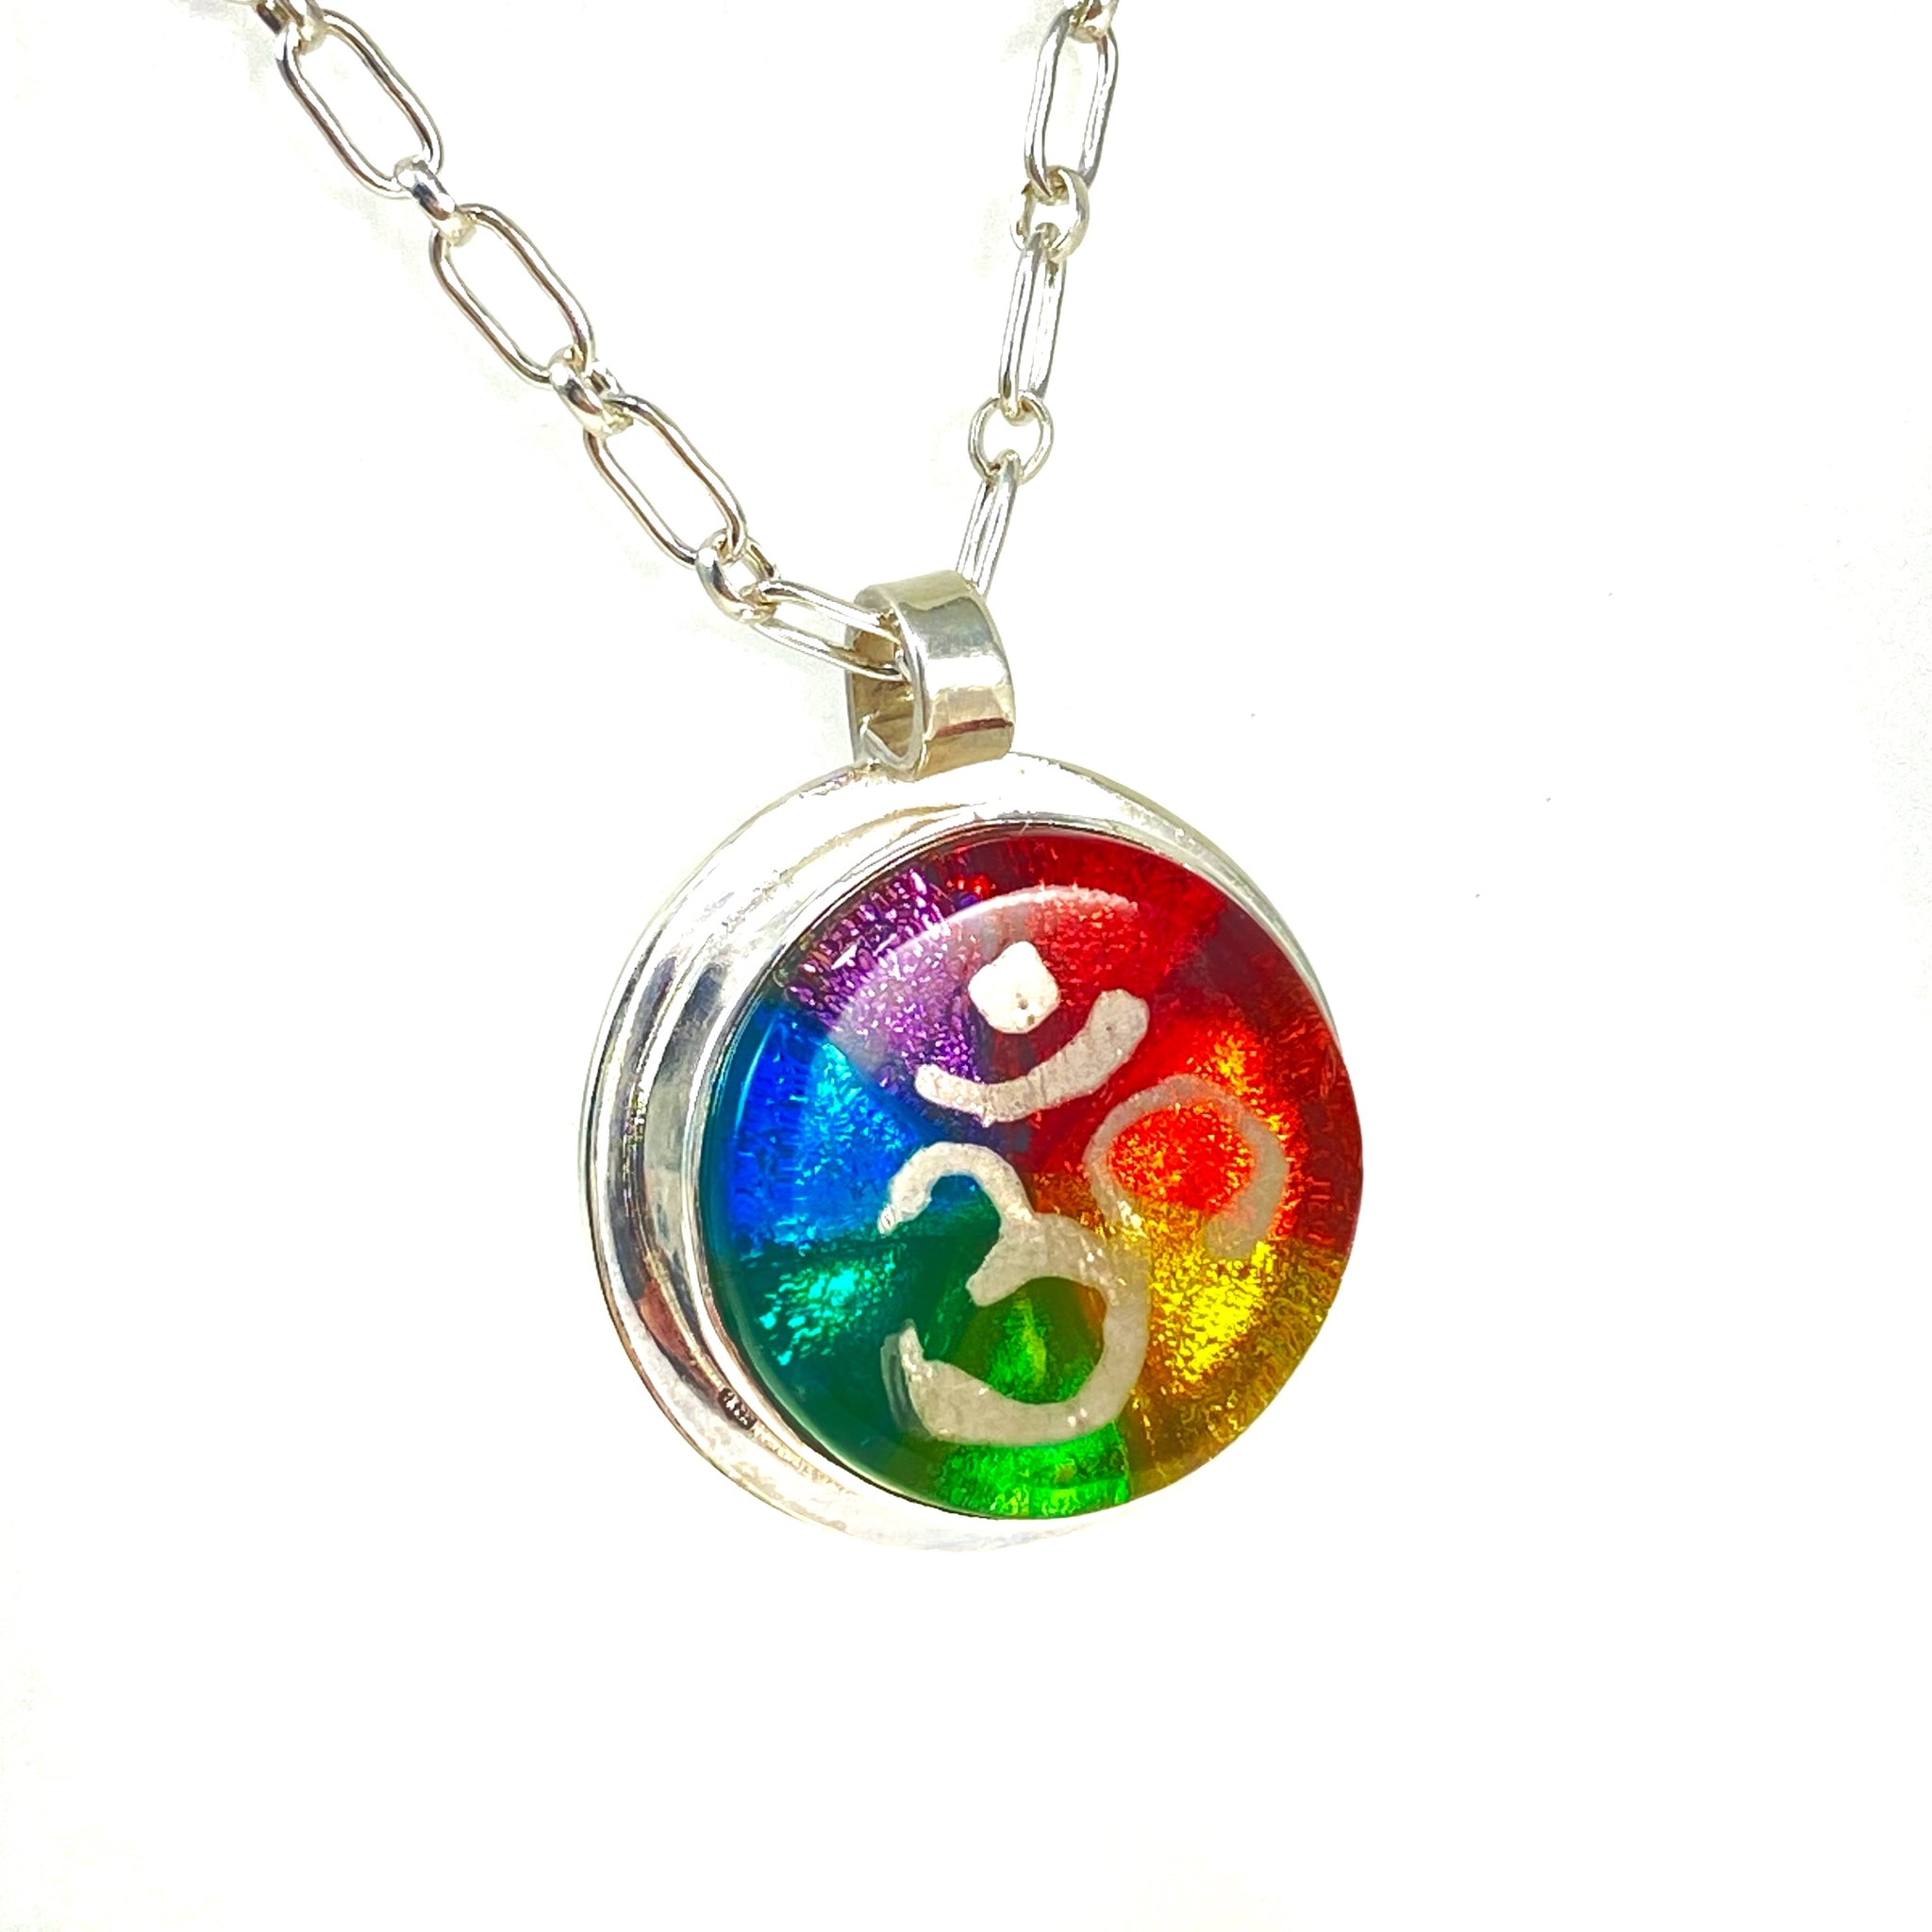 kaleidoscope circle necklace in rainbow colors, silver luster painted OHM symbol,fused glass, glass jewelry, glass and silver jewelry, handmade, handcrafted, American Craft, hand fabricated jewelry, hand fabricated jewellery, Athen, Georgia, colorful jewelry, sparkle, bullseye glass, dichroic glass, art jewelry